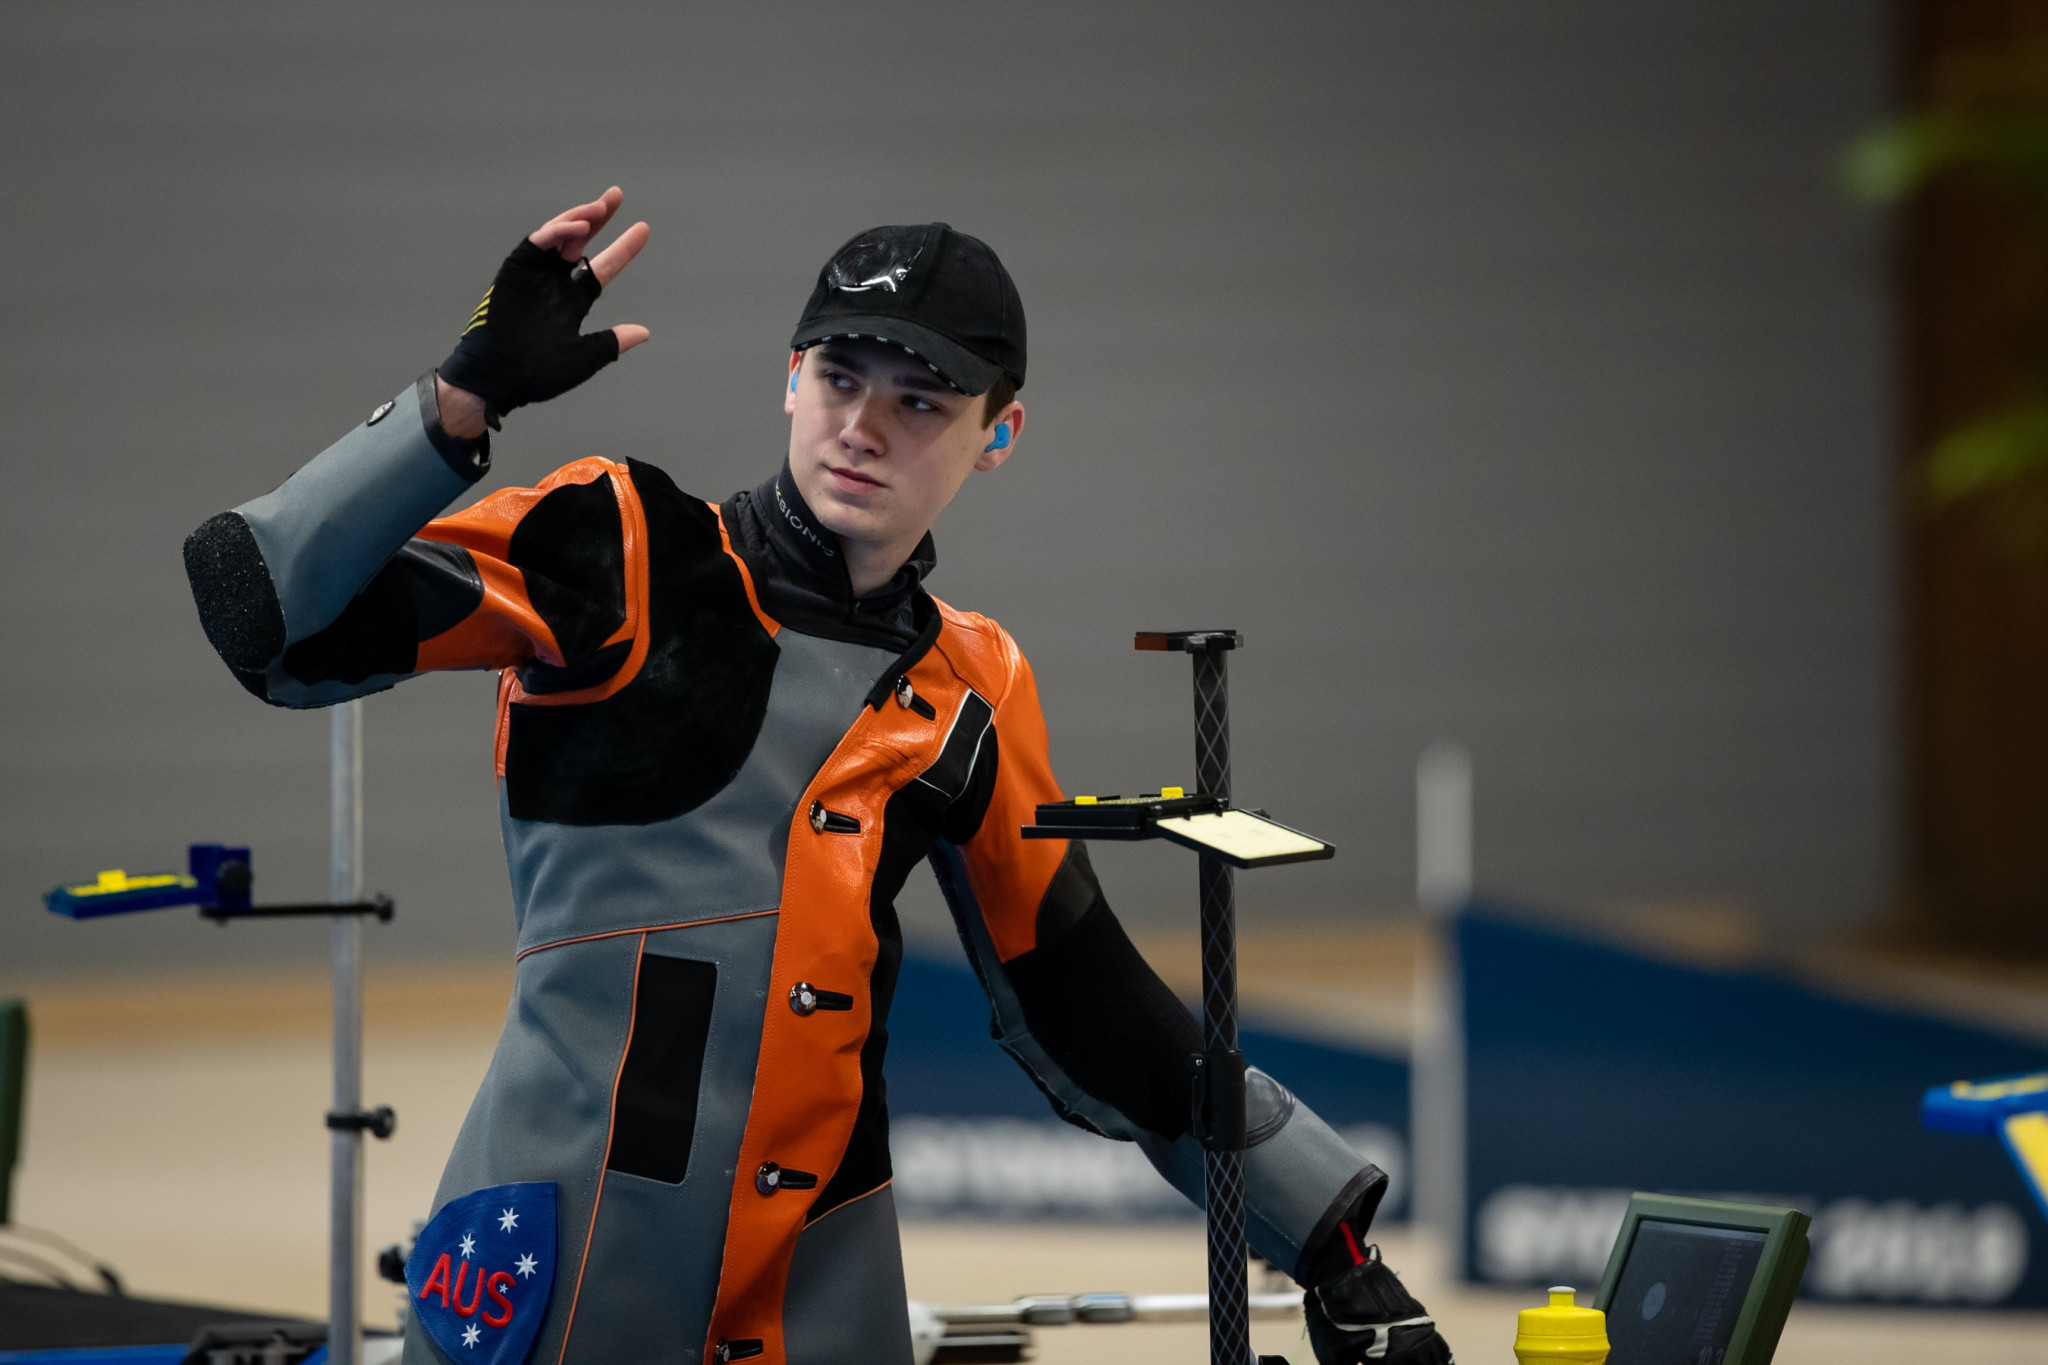 Alex Hoberg triumphed in the men's 10 metres air rifle final on a successful day for hosts Australia at the Oceania Shooting Championship in Sydney ©Shooting Australia